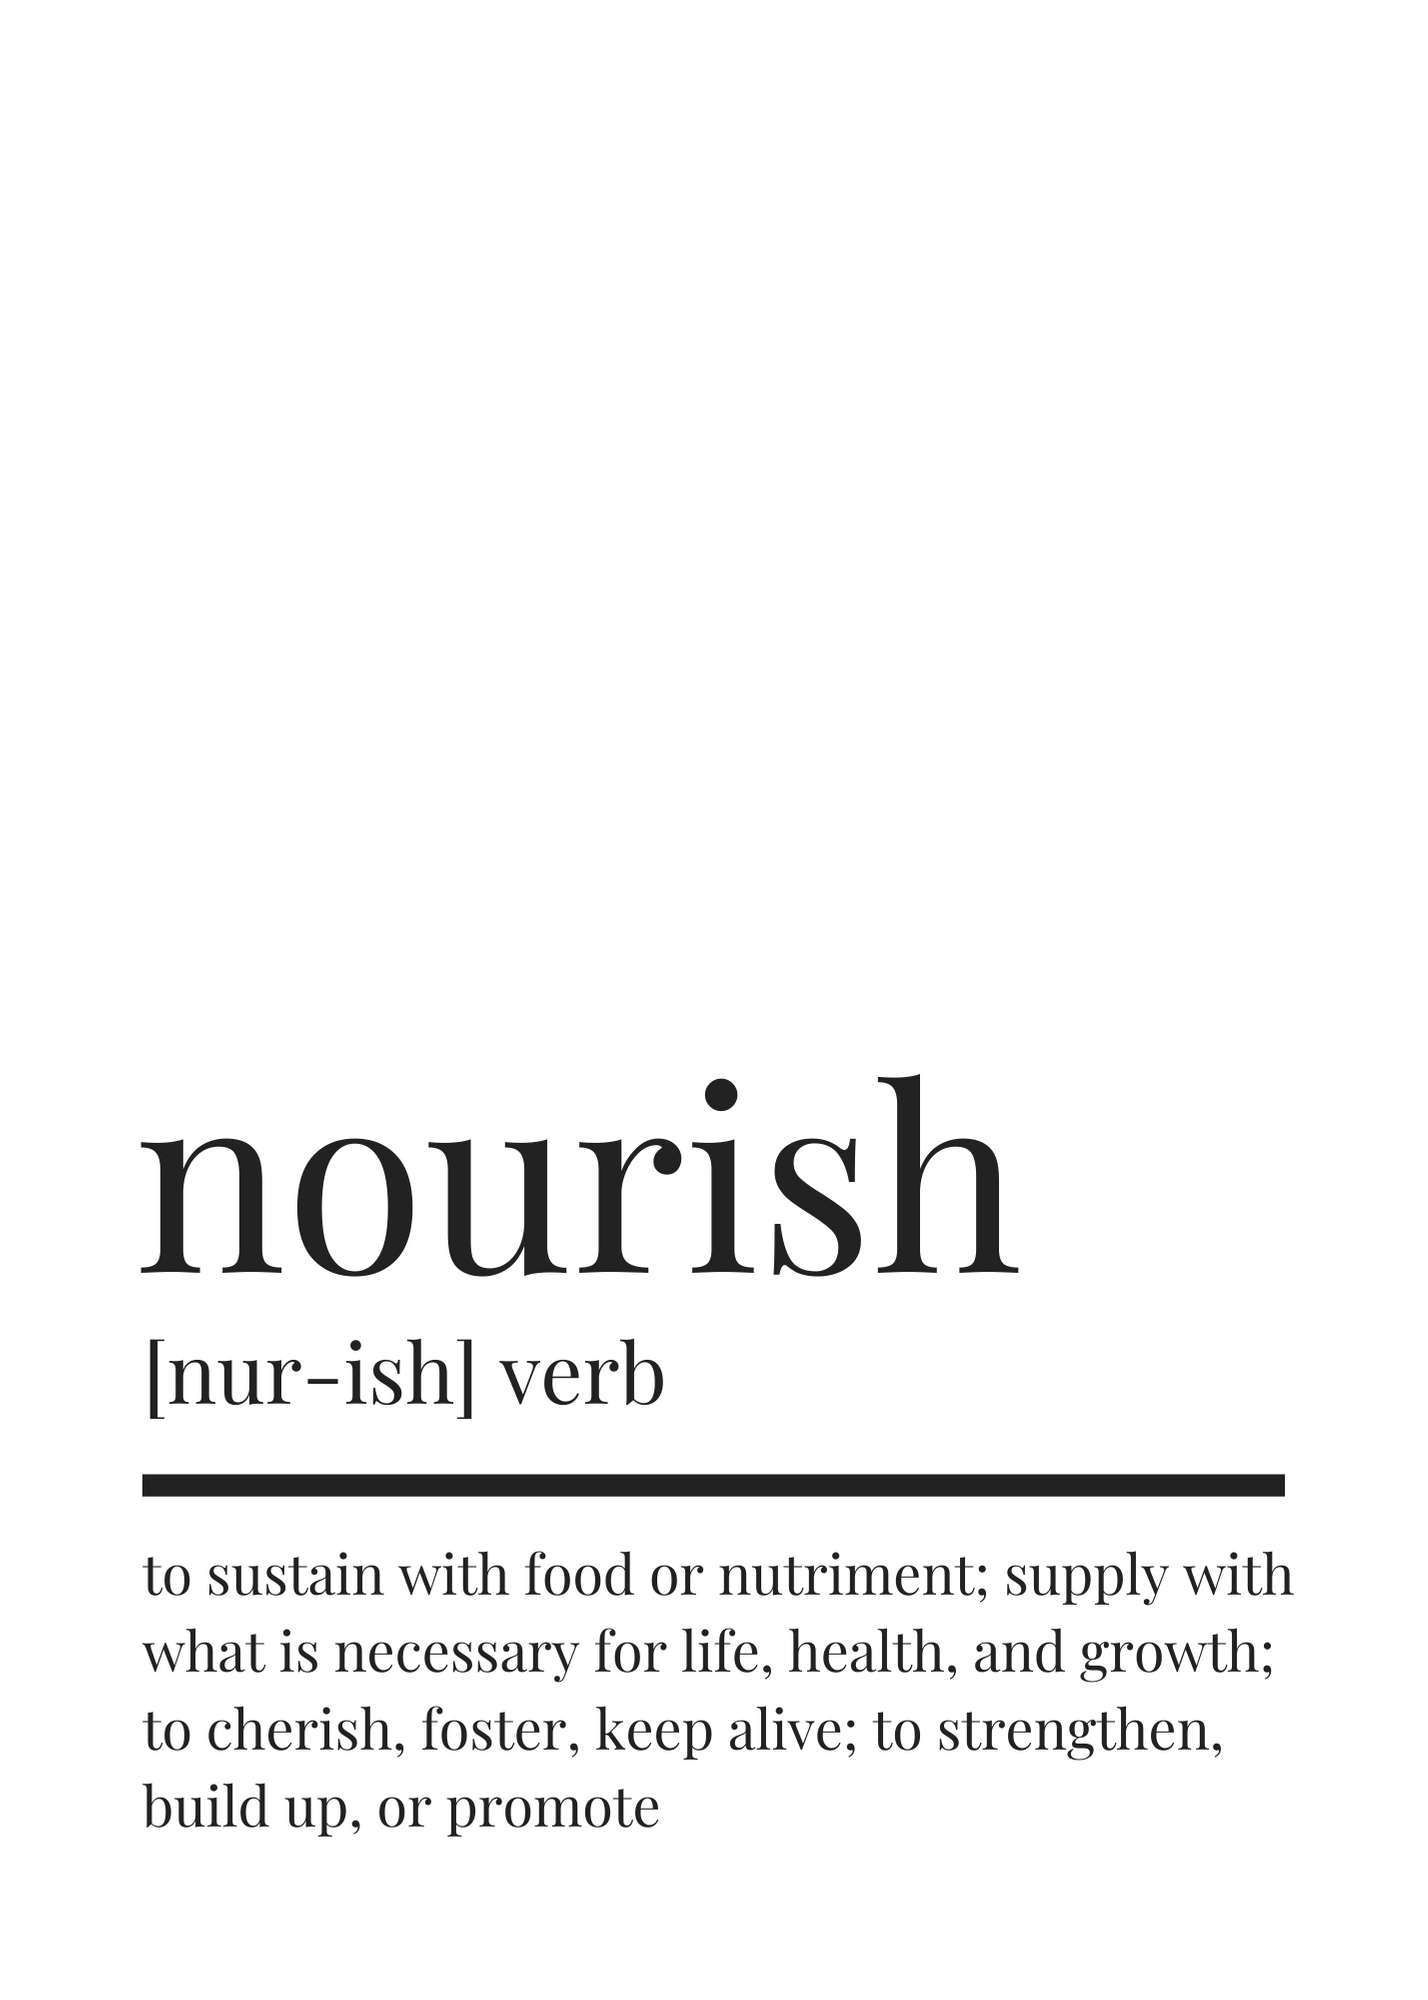 definition of the word nourish